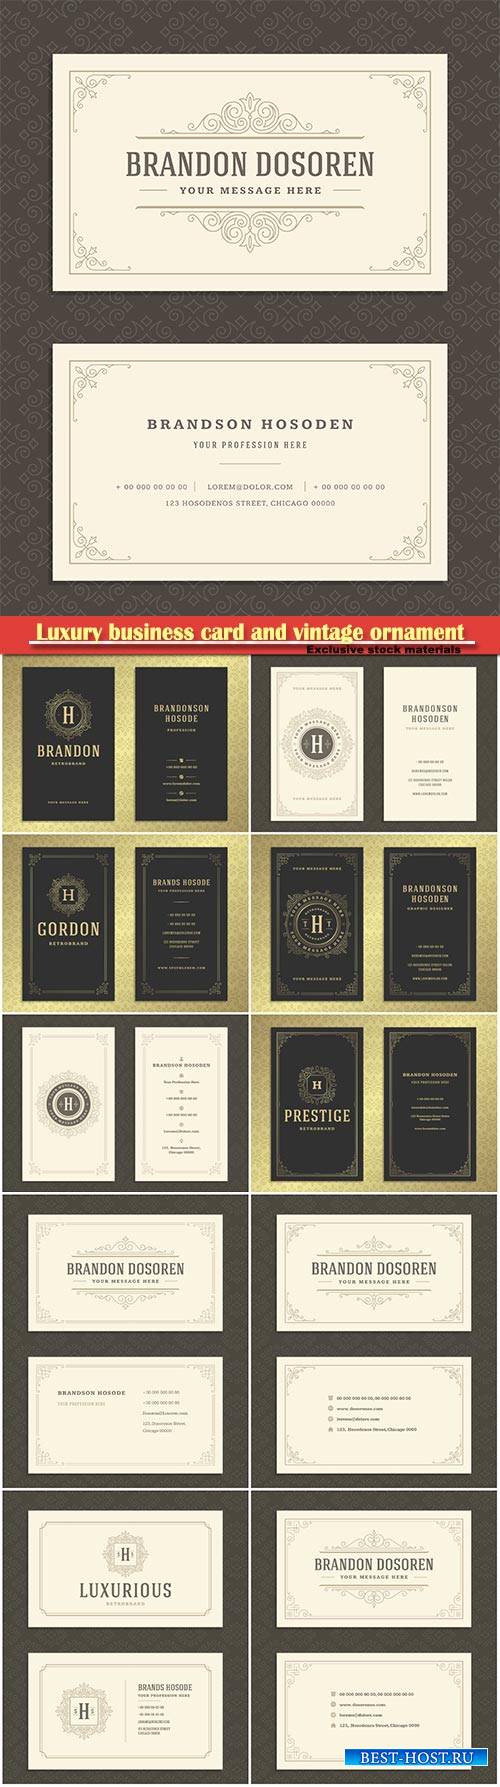 Luxury business card and vintage ornament logo vector template